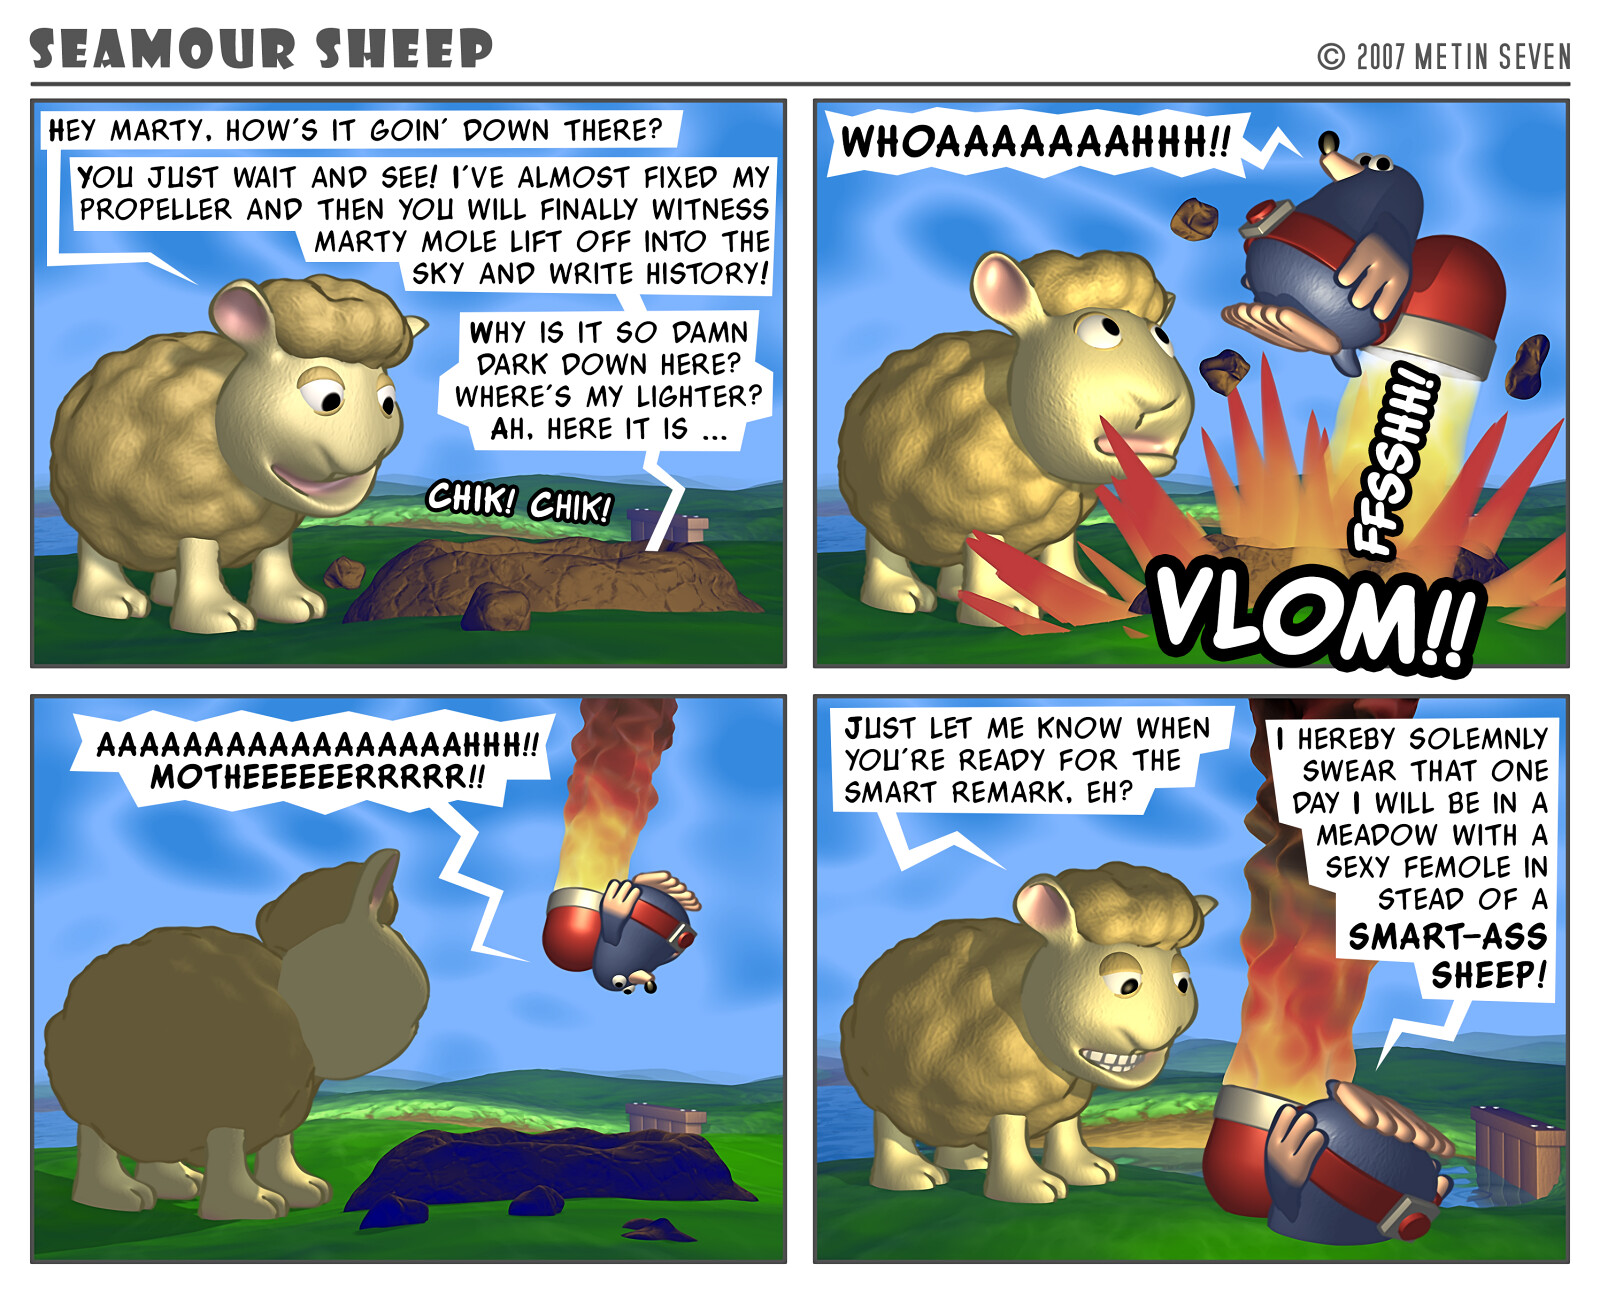 Seamour Sheep and Marty Mole comic strip episode: Liftoff